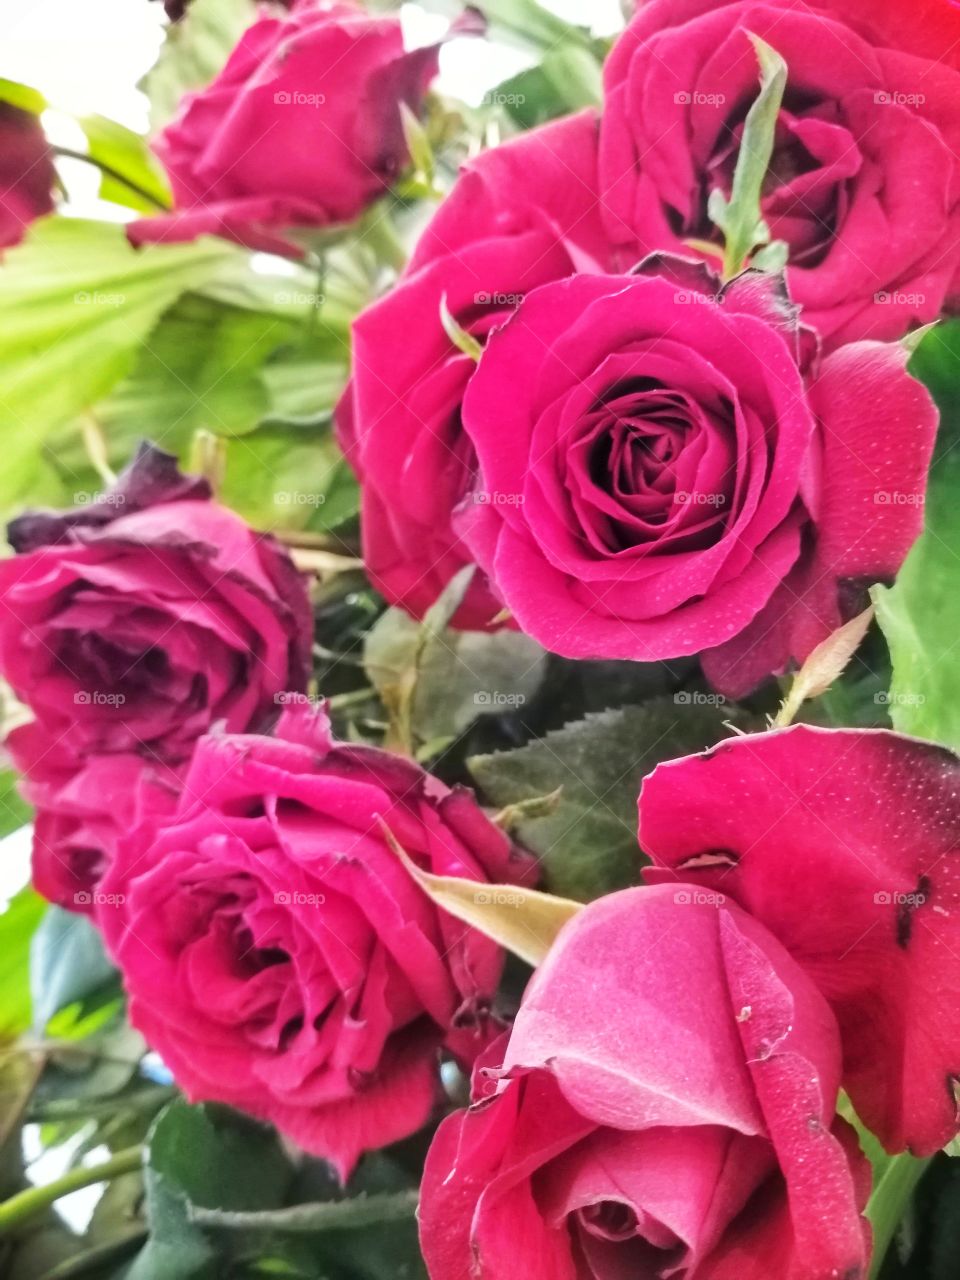 The effect of red roses after a few days without water. These roses are starting to die.